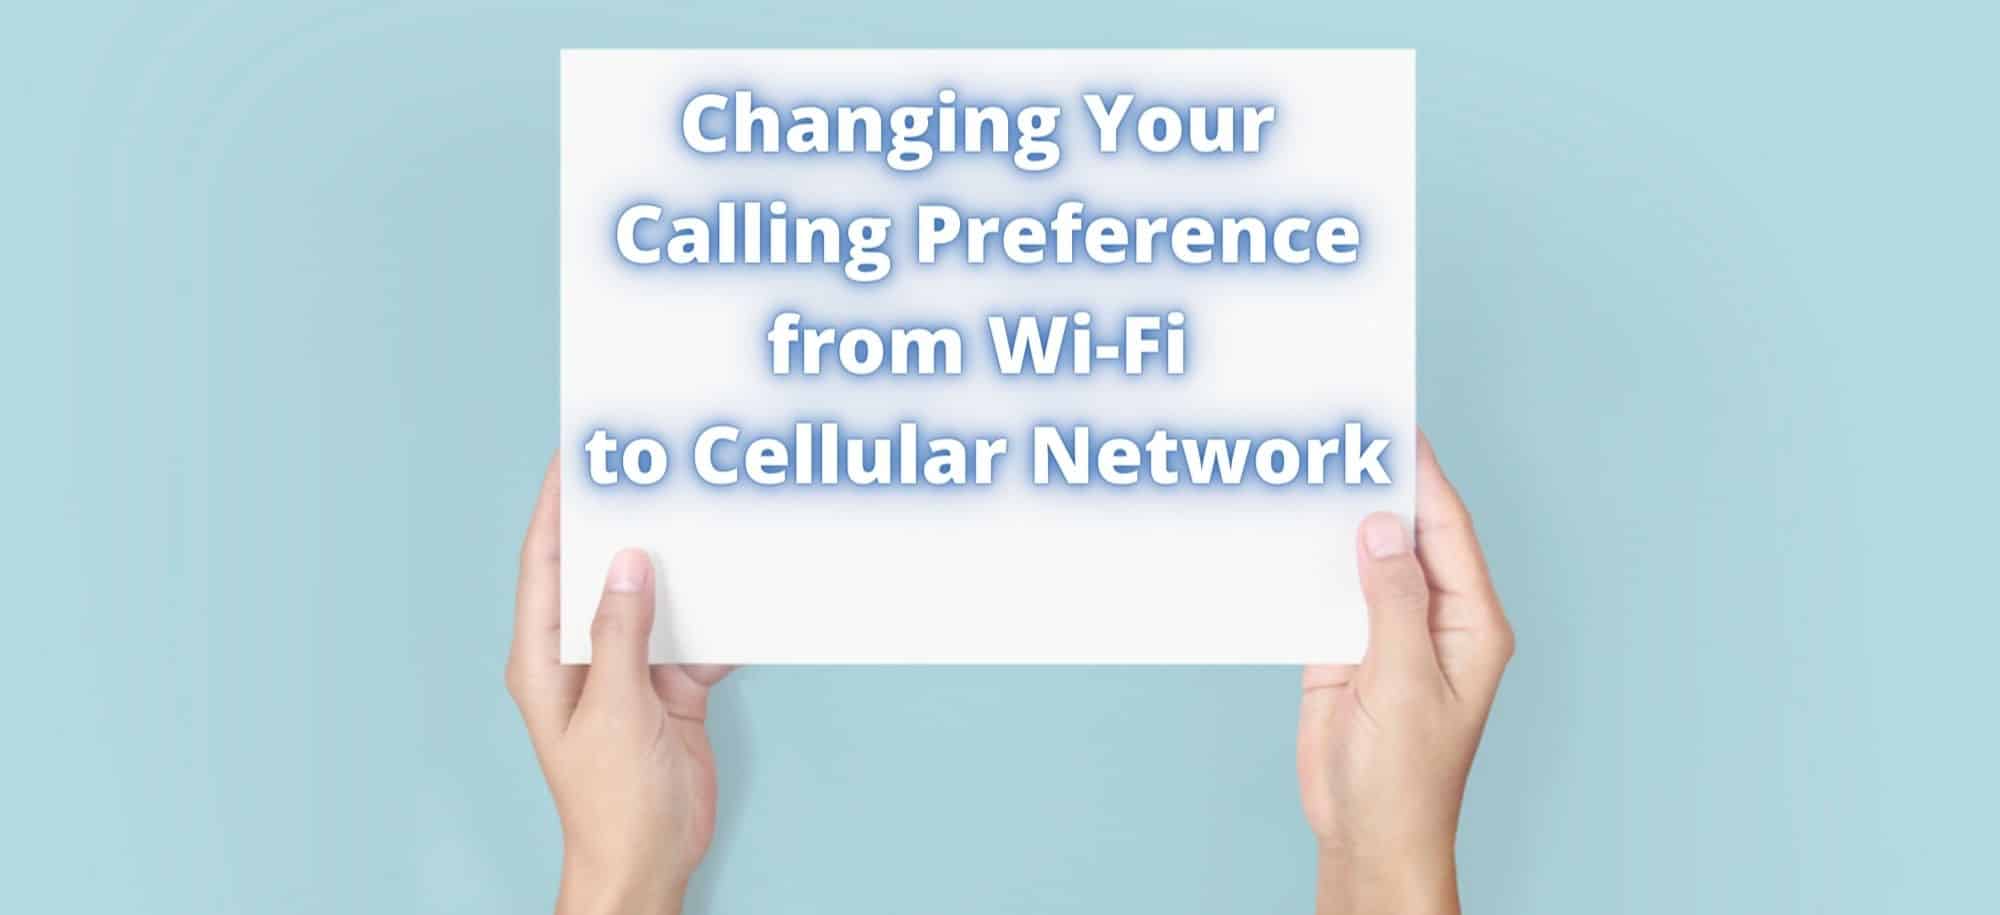 Changing Your Calling Preference from Wi-Fi to Cellular Network